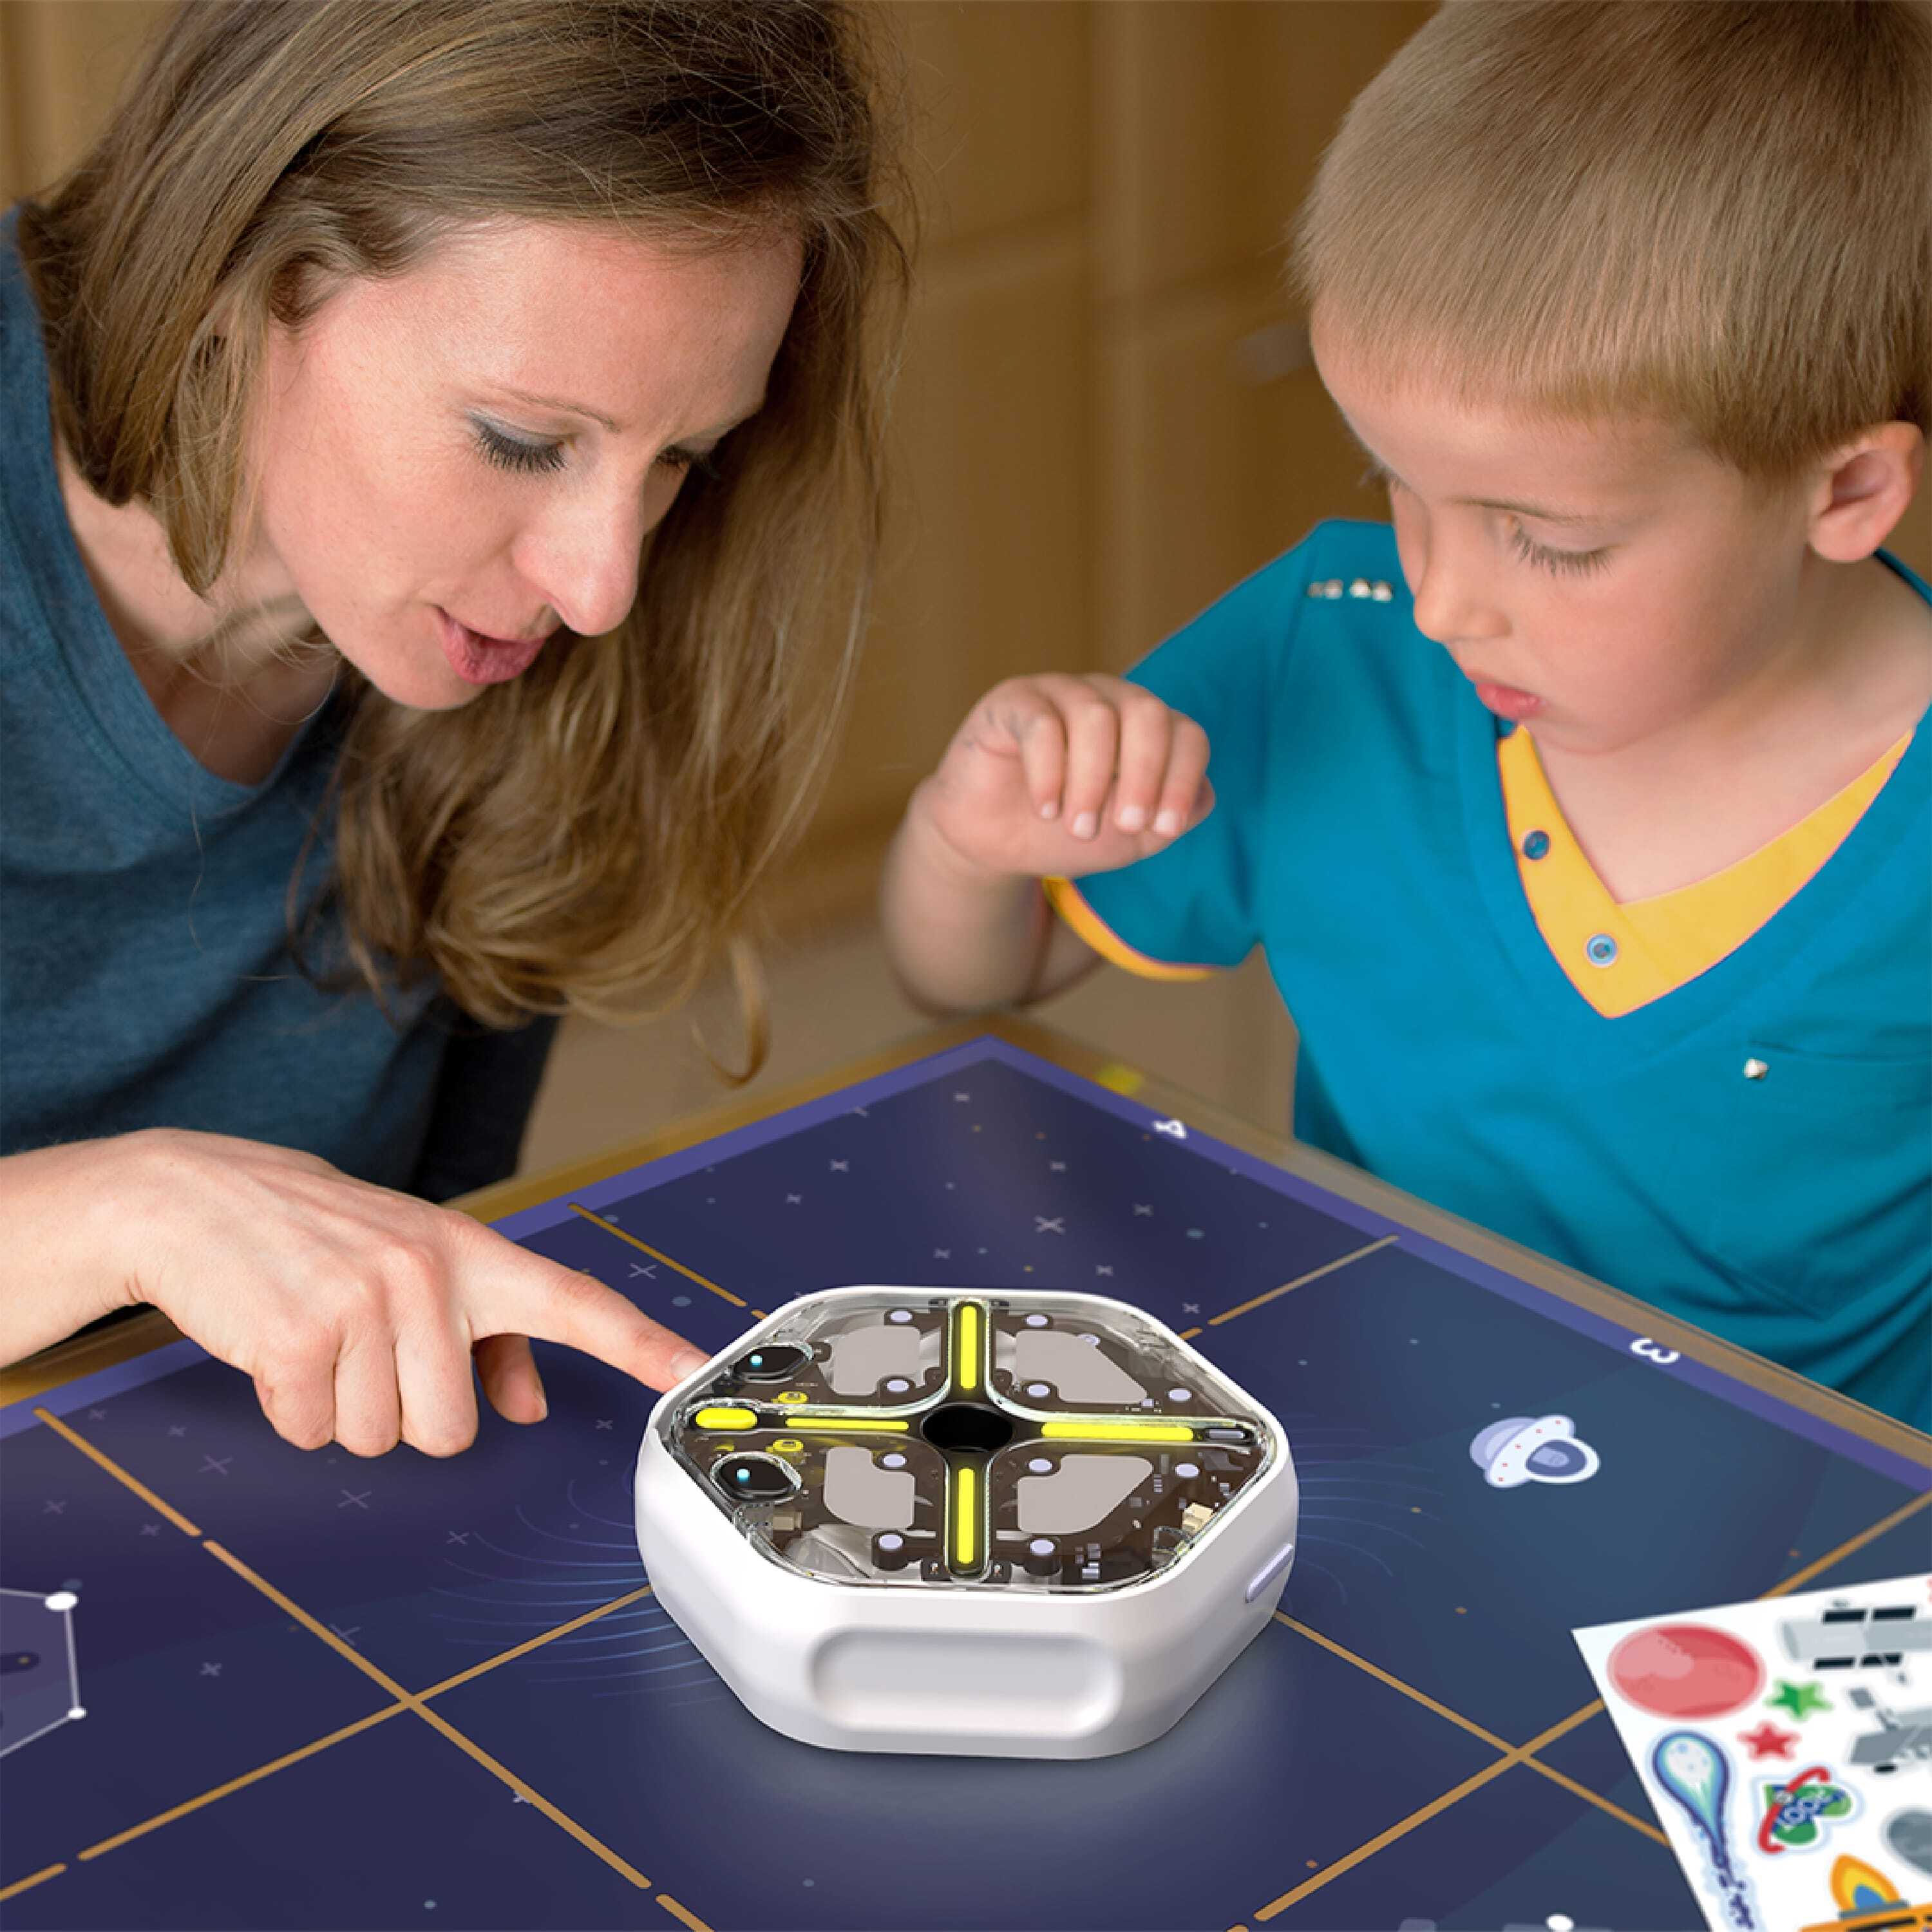 https://edu.irobot.com/assets/shop/Root-rt0_Coding-in-Outer-Space_Adventure-Pack-Accessory_Lifestyle-Home_Mom-Son_Vinyl-Clings_3000x3000_No-Logo.jpg